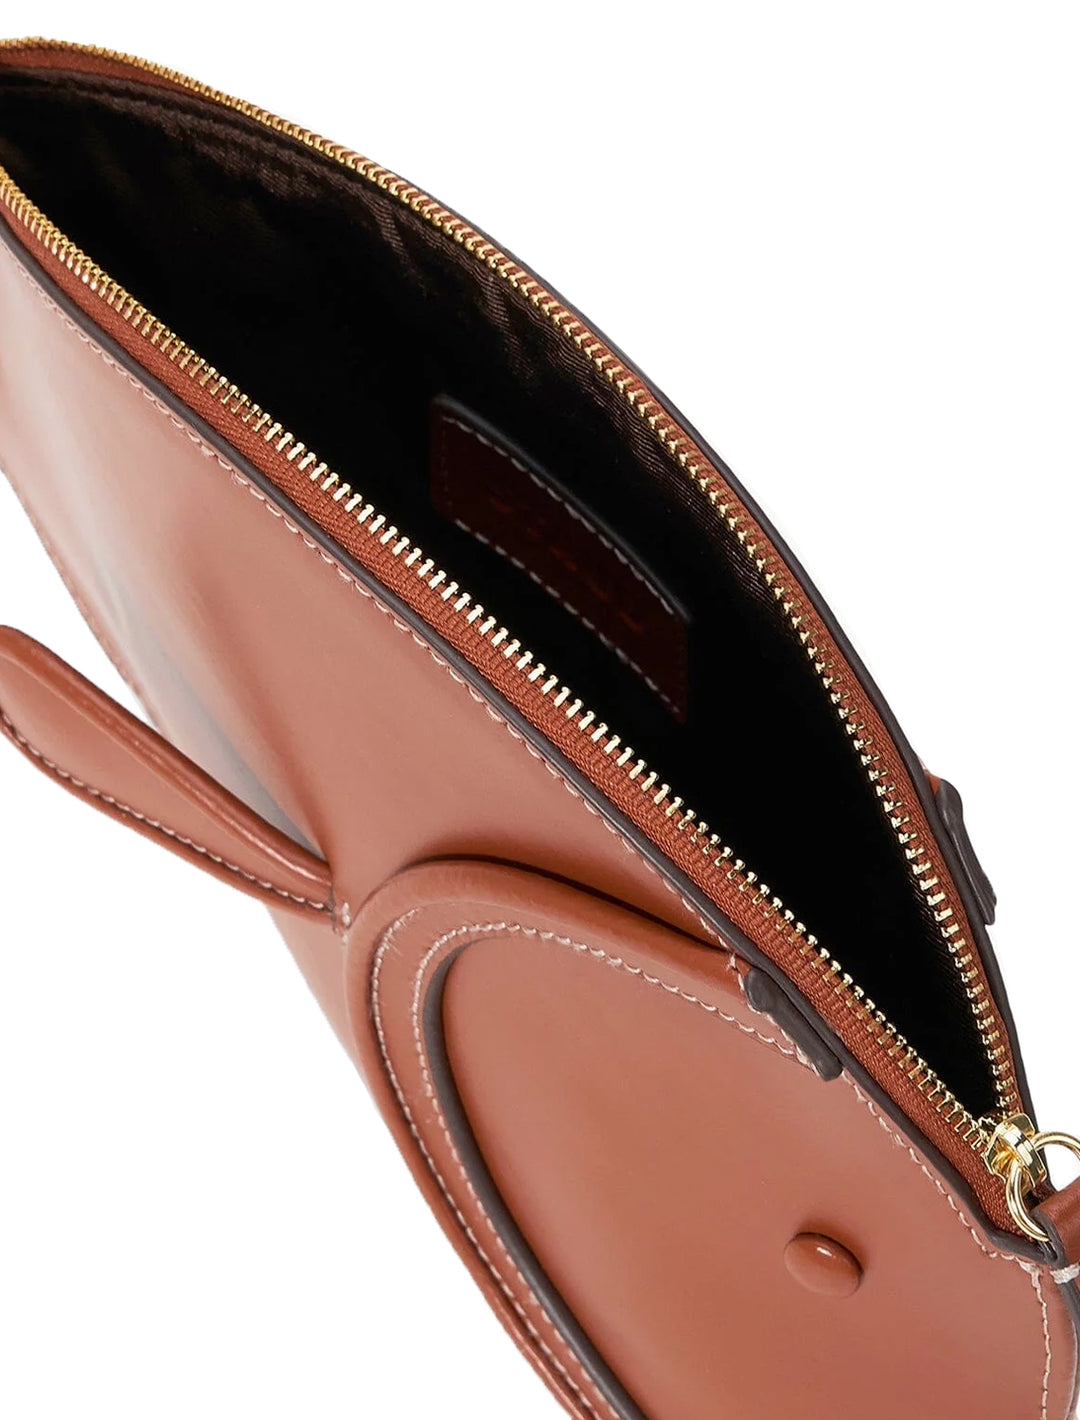 Close-up inside view of STAUD's pesce leather clutch in tan.